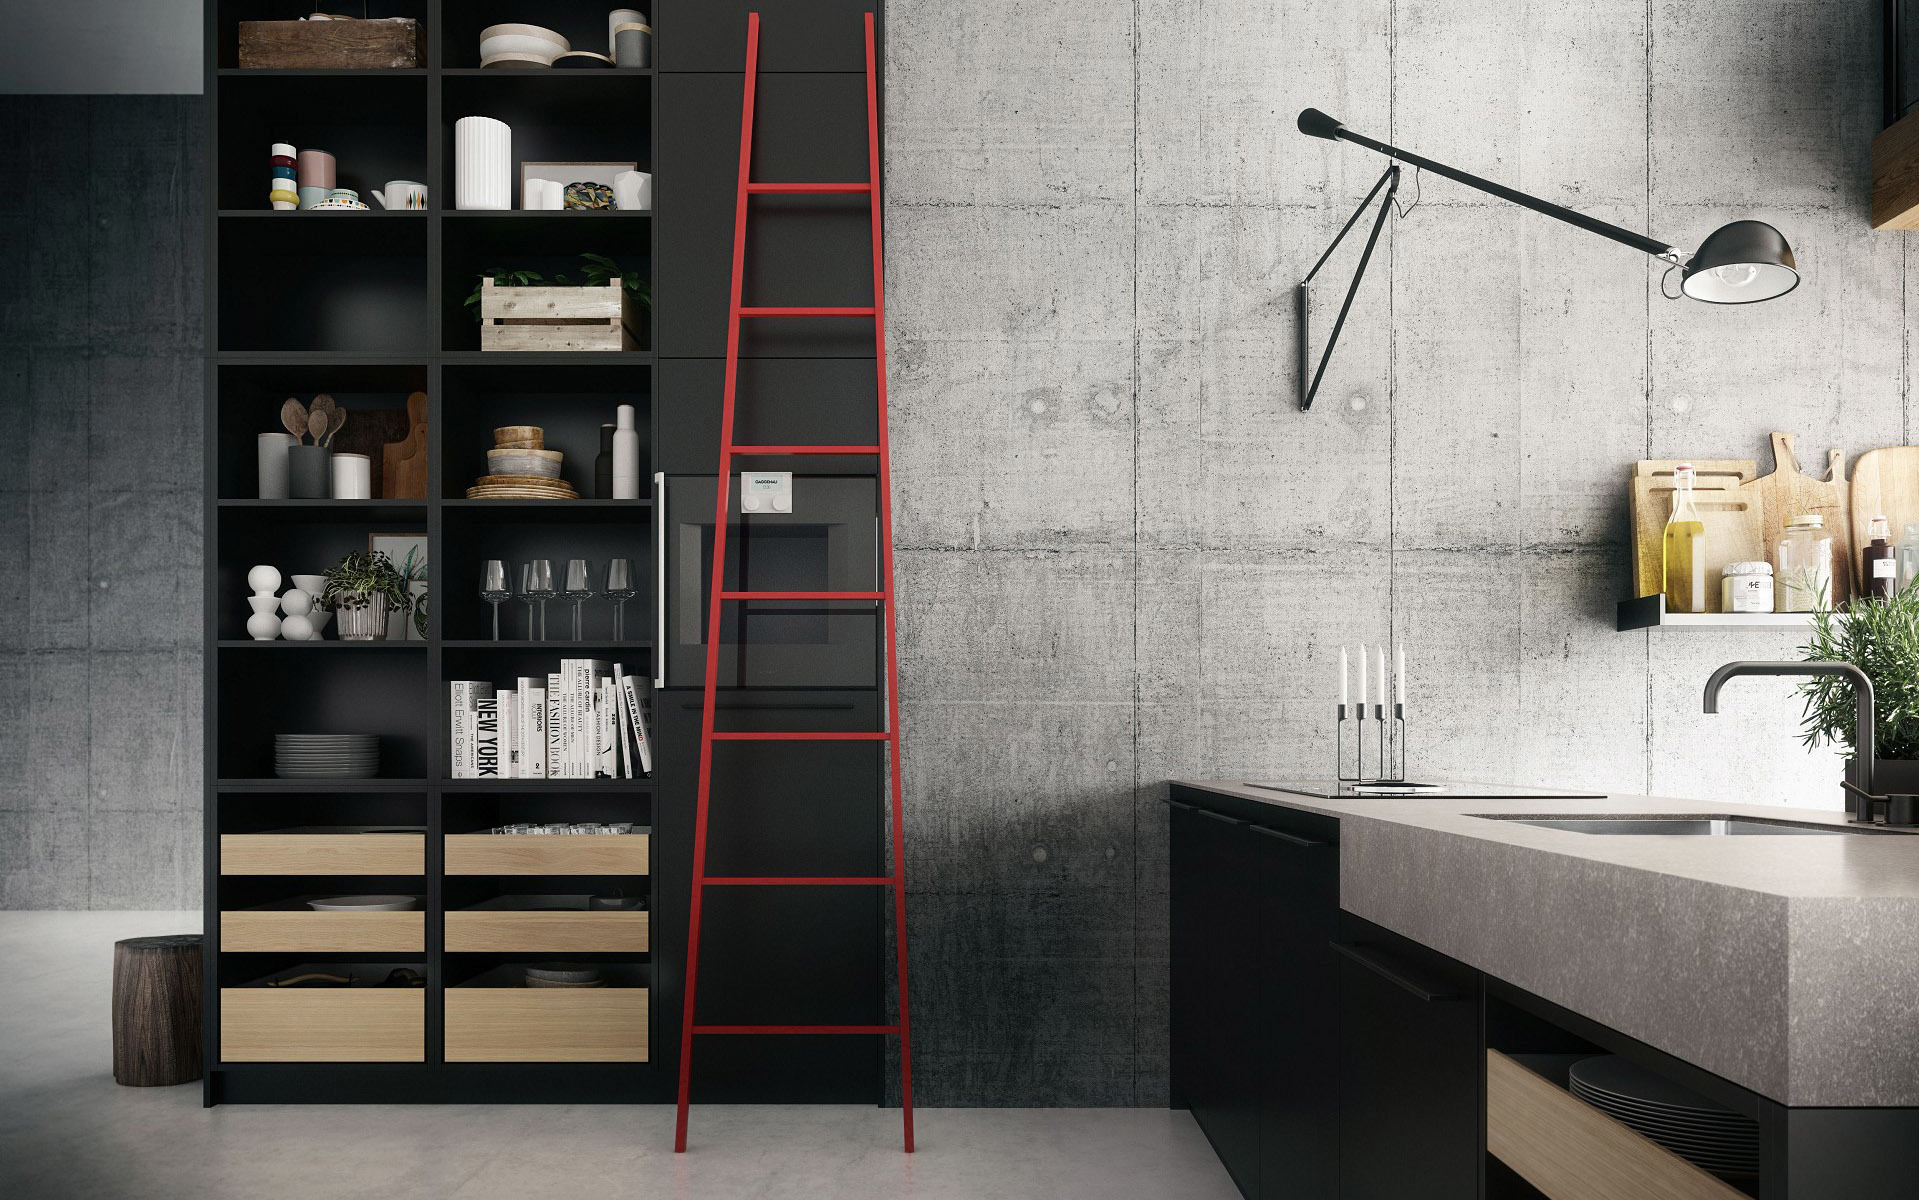 Room-dividing, ceiling-high SieMatic Urban SE shelves in graphite grey with integrated electric appliances to connect kitchen with living areas